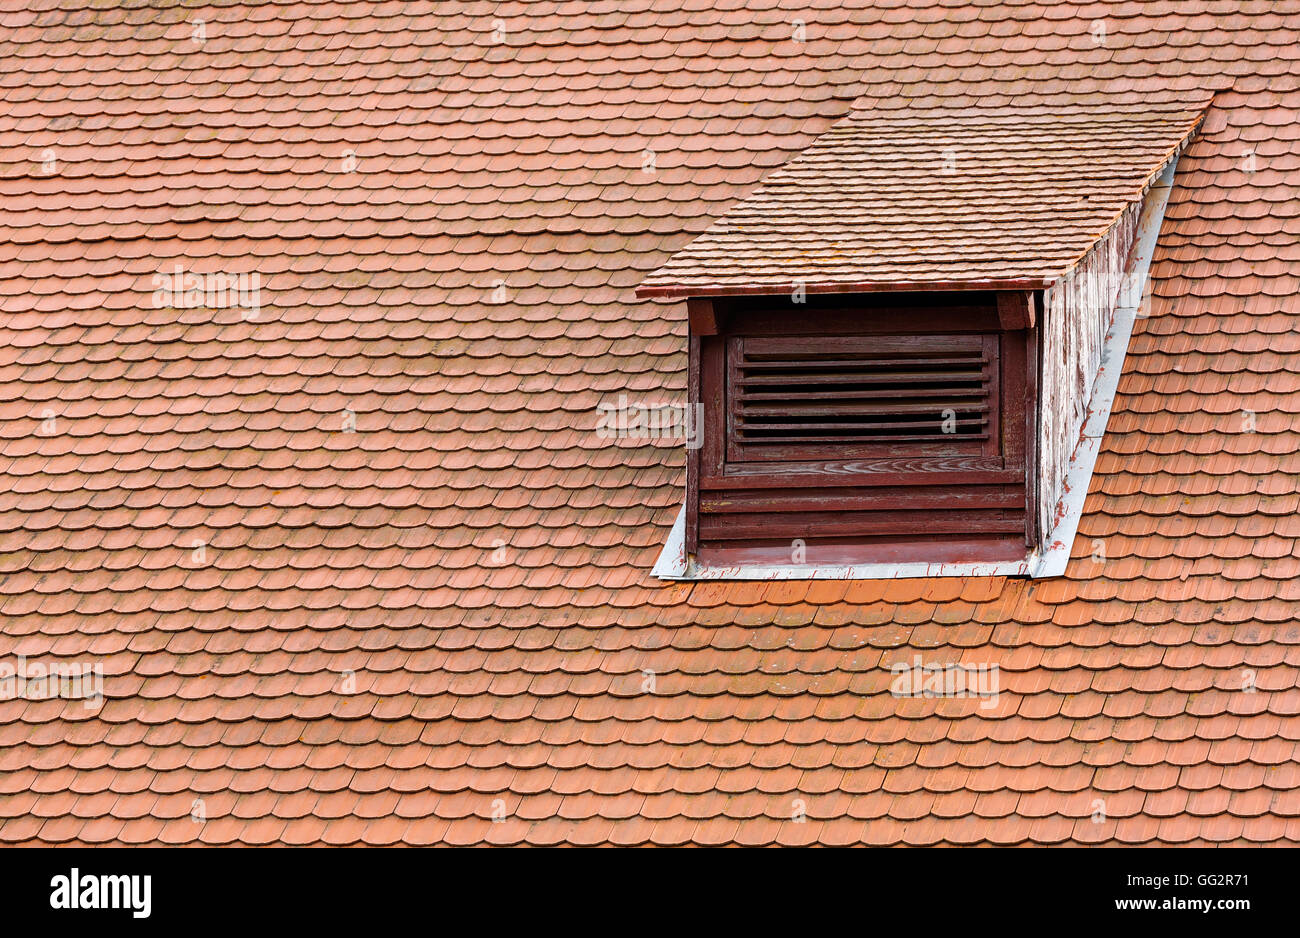 Weathered red tiled roof with dormer window Stock Photo